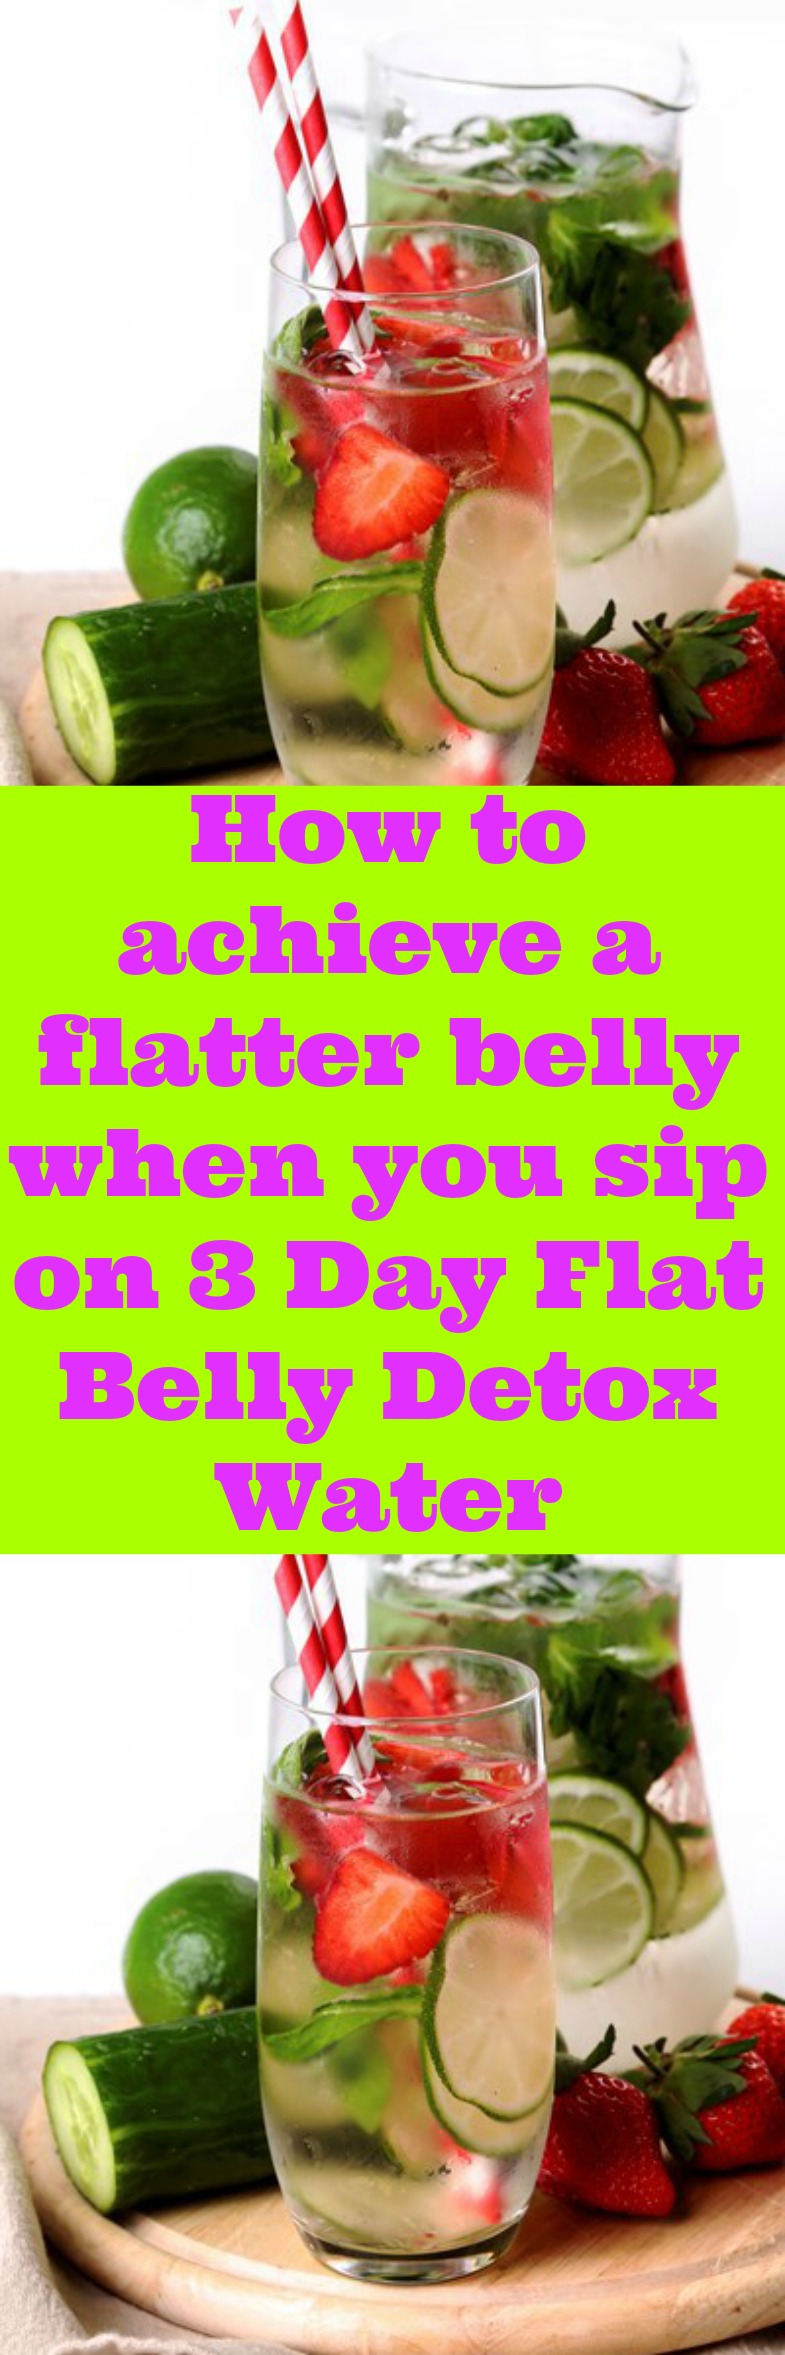 How to achieve a flatter belly when you sip on 3 Day Flat Belly Detox Water. De-bloat with this drink that will cleanse your liver.In 3 days you will achieve a flatter stomach.